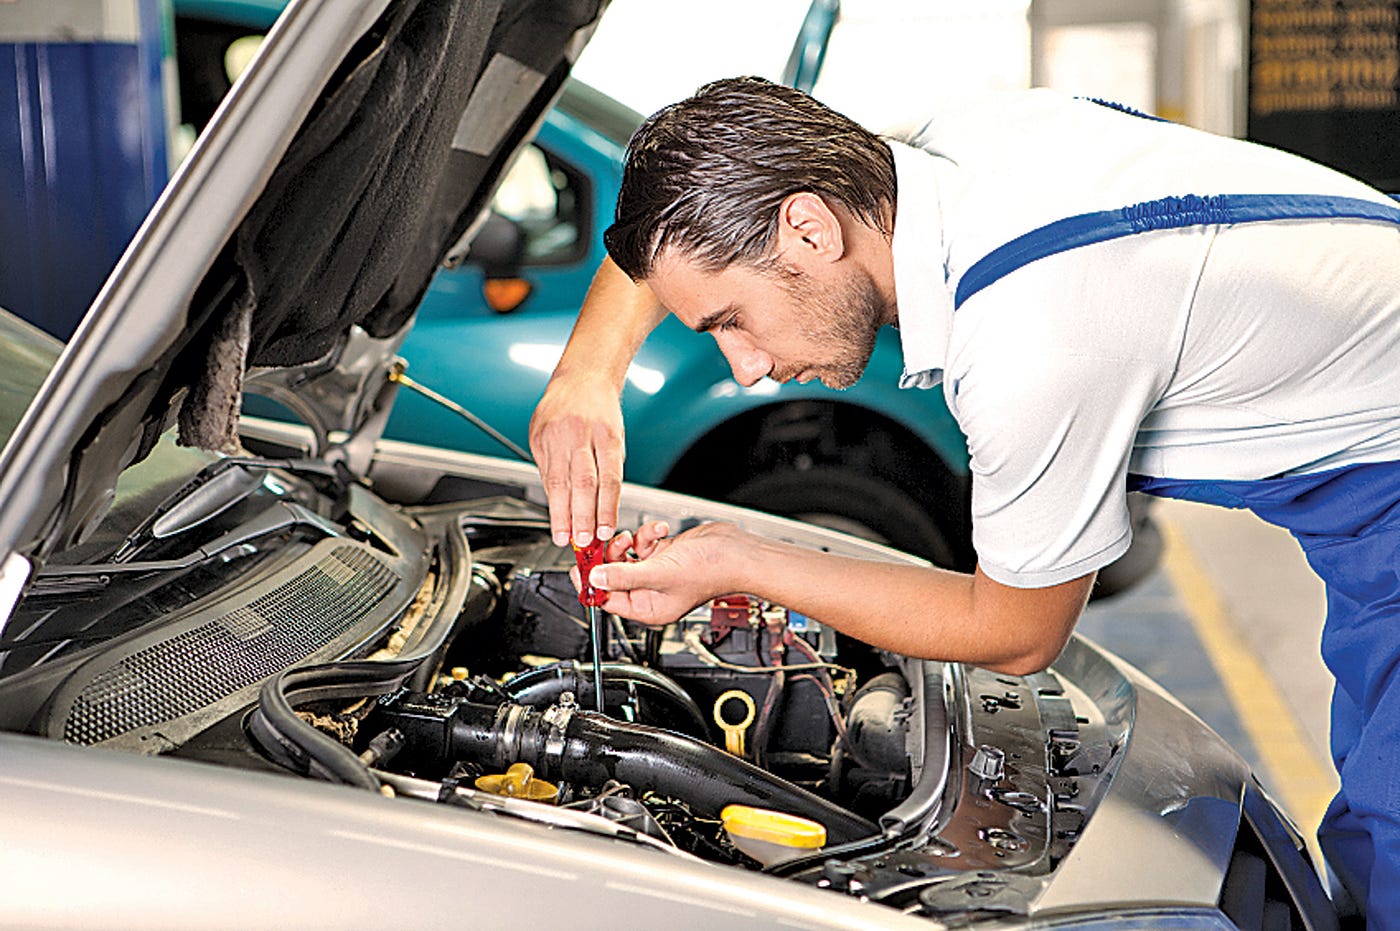 Become Educated On Auto Repair With These Tips